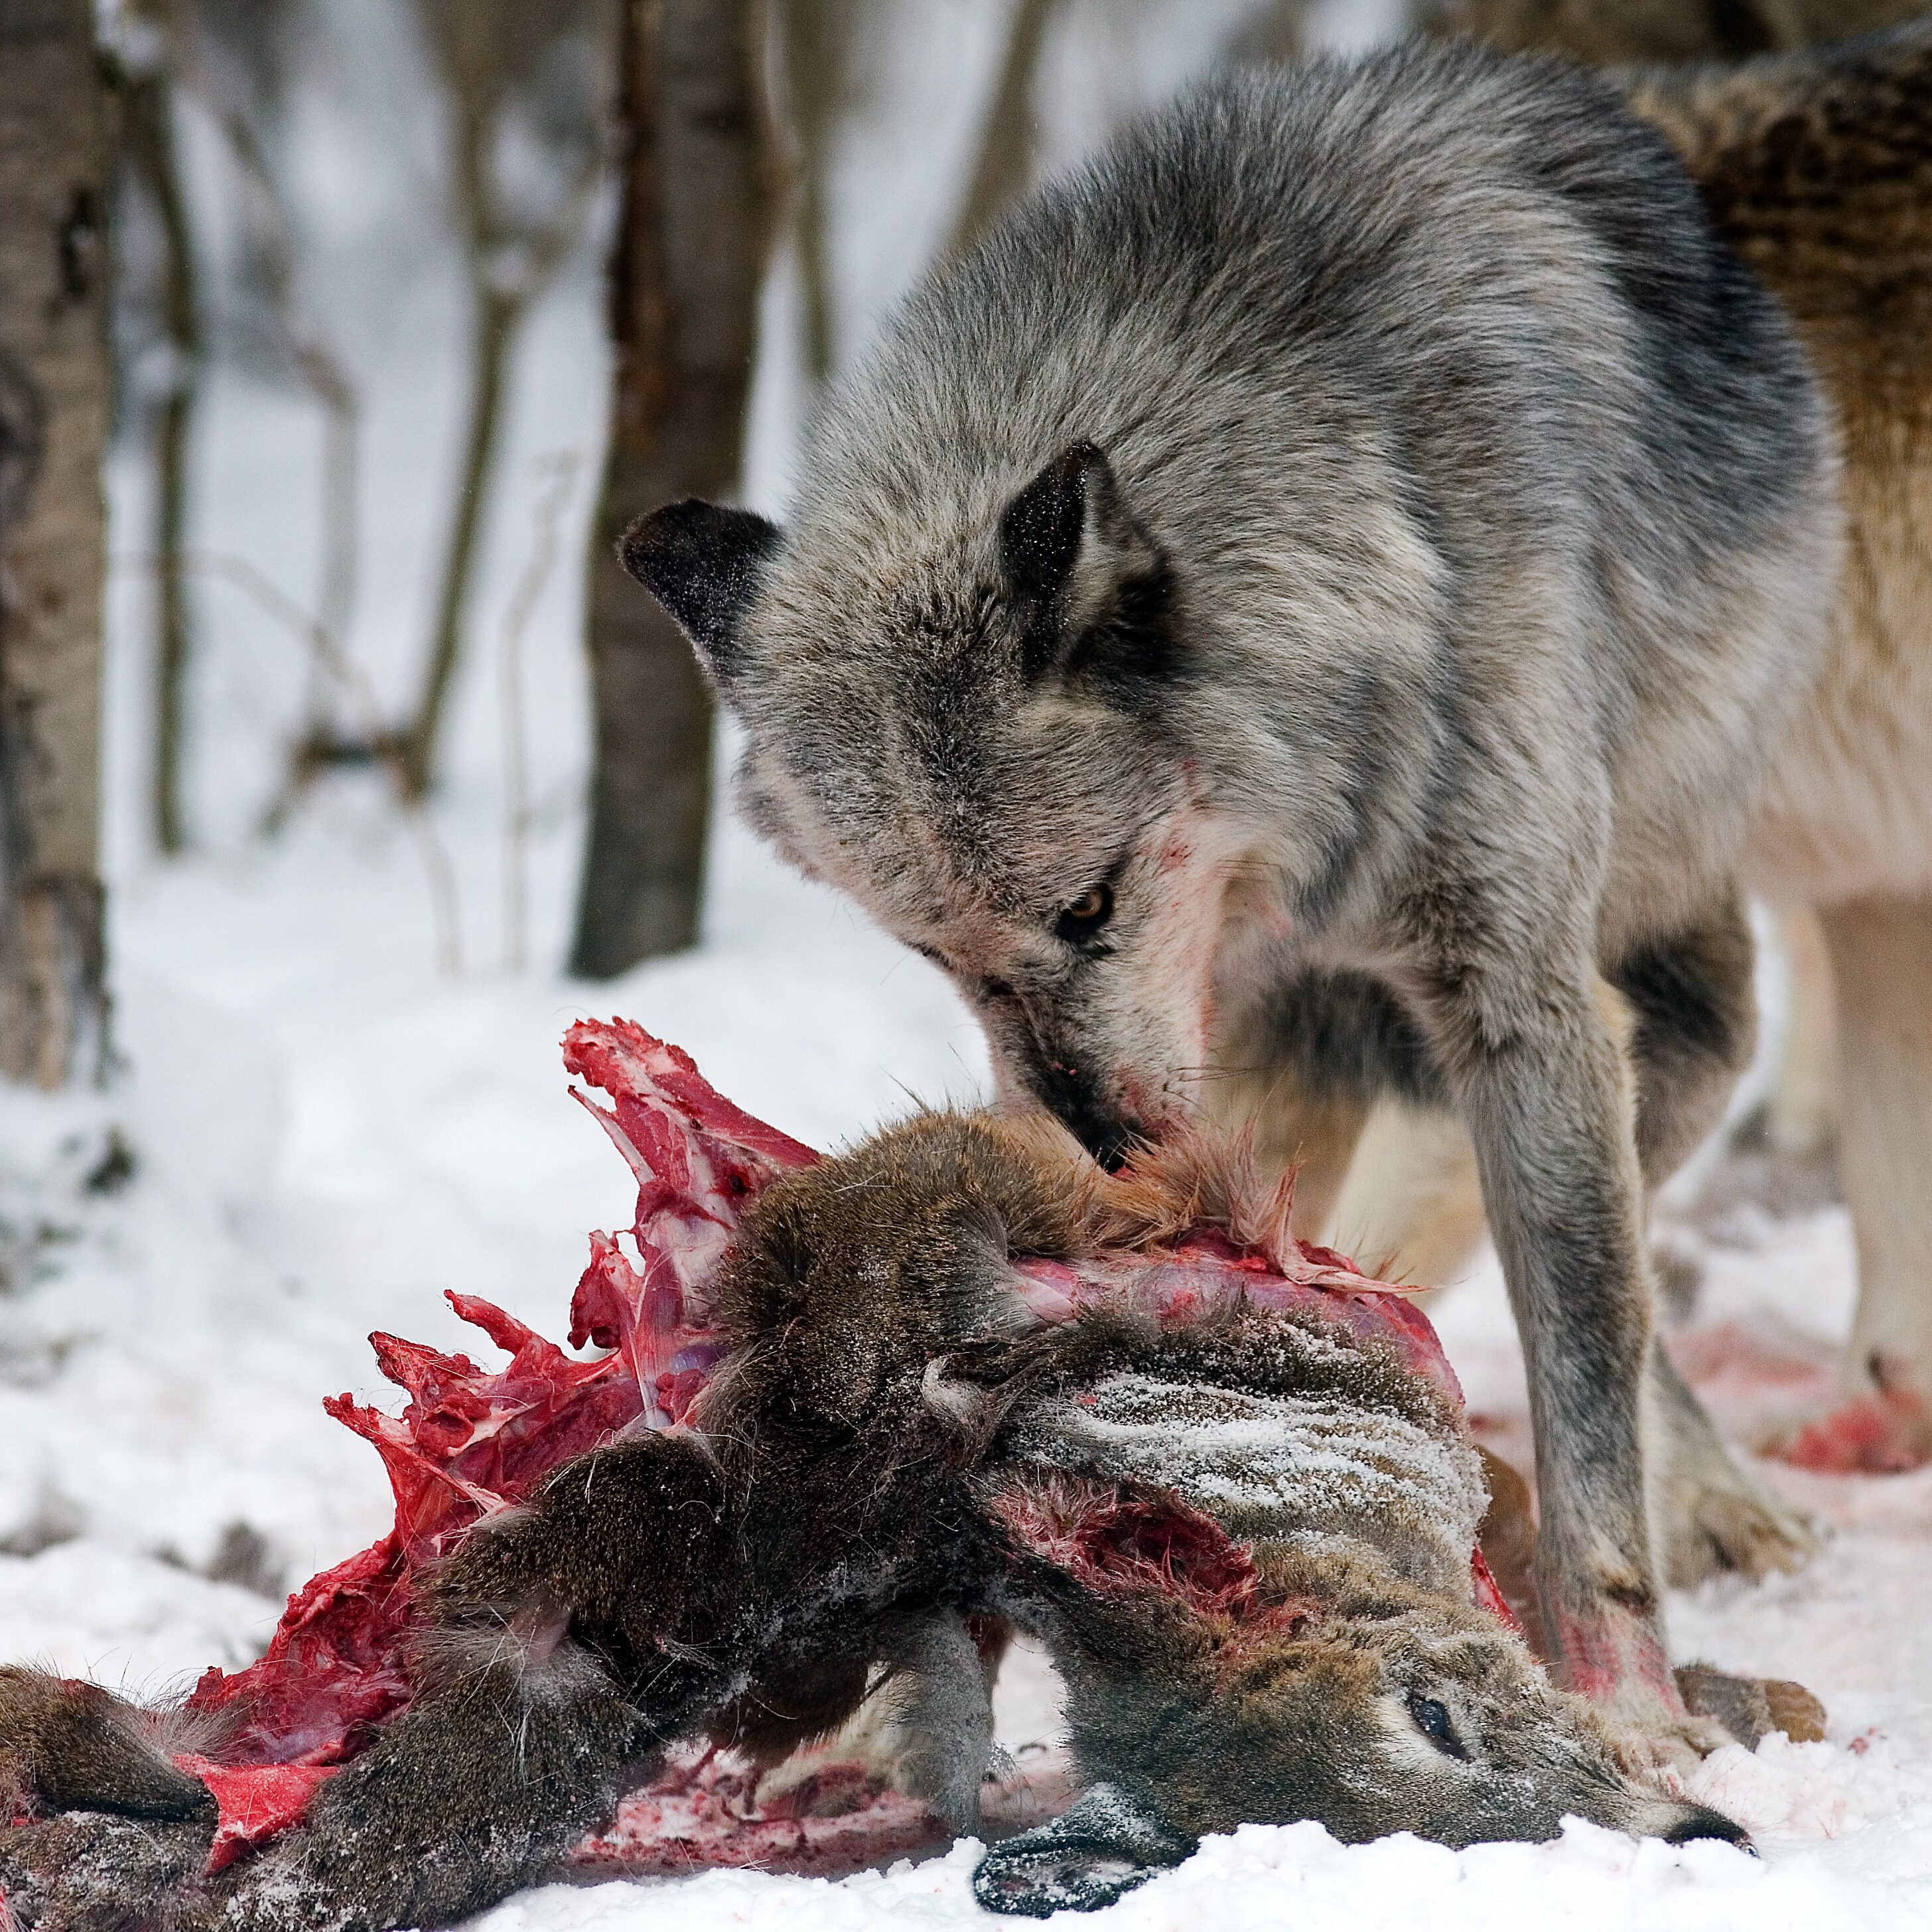 Gray wolves hunting, eating and resting.